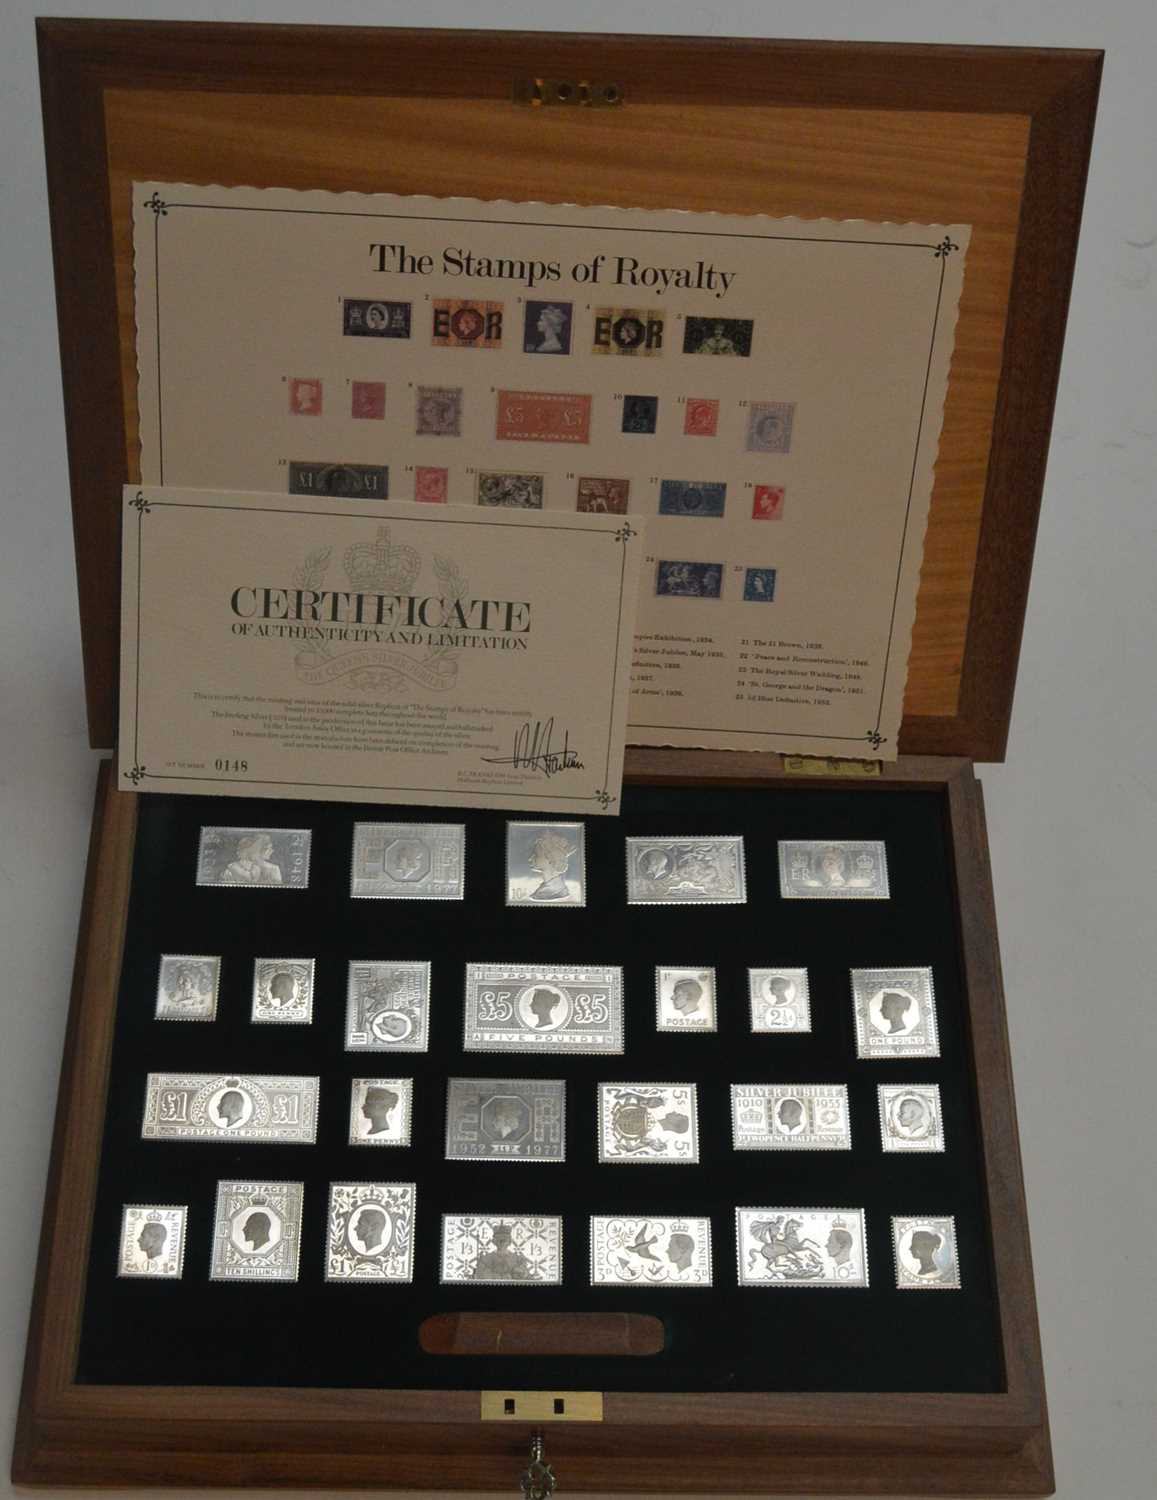 Lot 726 - Hallmark Replicas Limited: The Stamps of Royalty